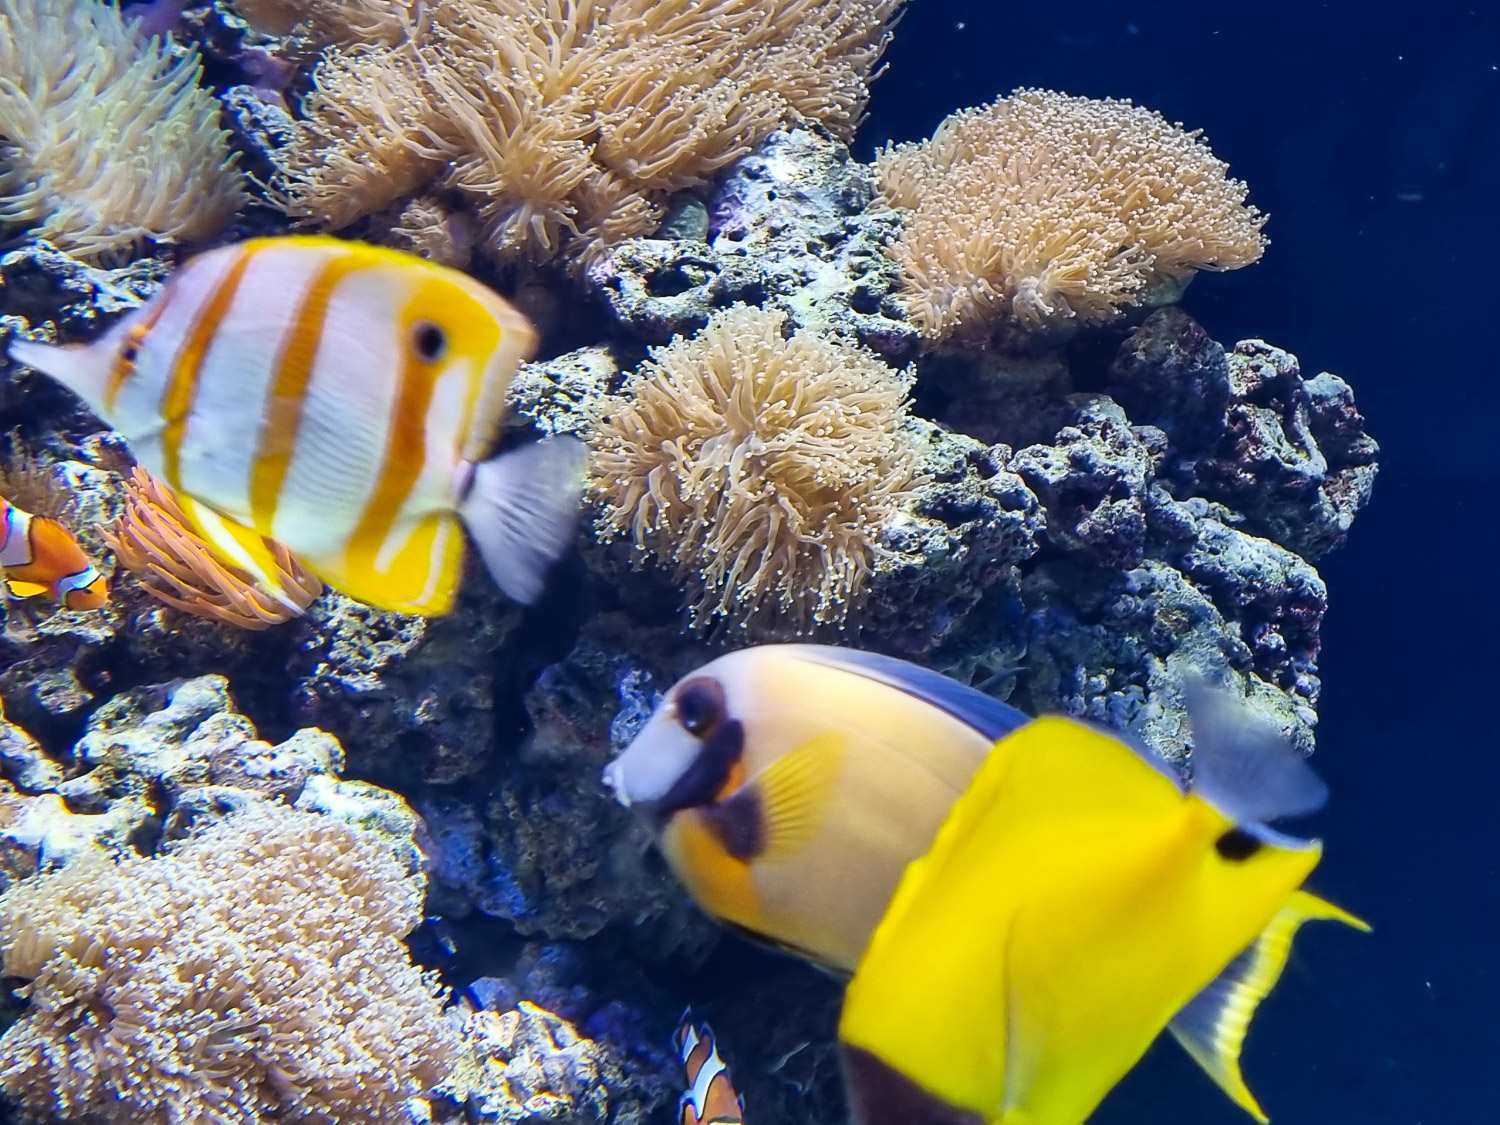 Bright yellow and striped reef fish plus a clownfish - coral reef fish are among those to be found at the Sea Life Aquarium on London's South Bank